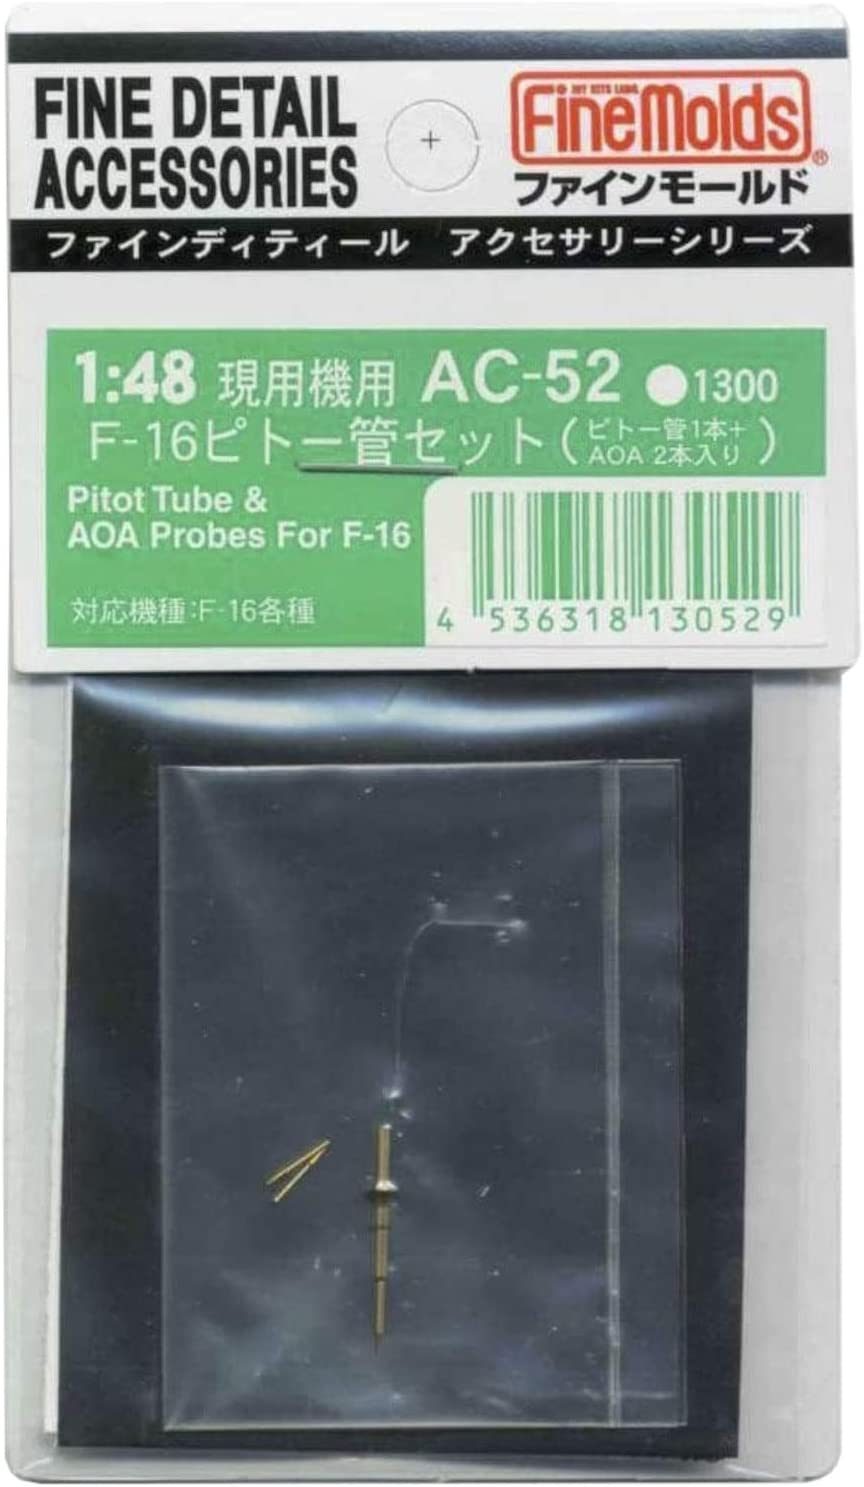 Pitot Tube & AOA probes for F-16